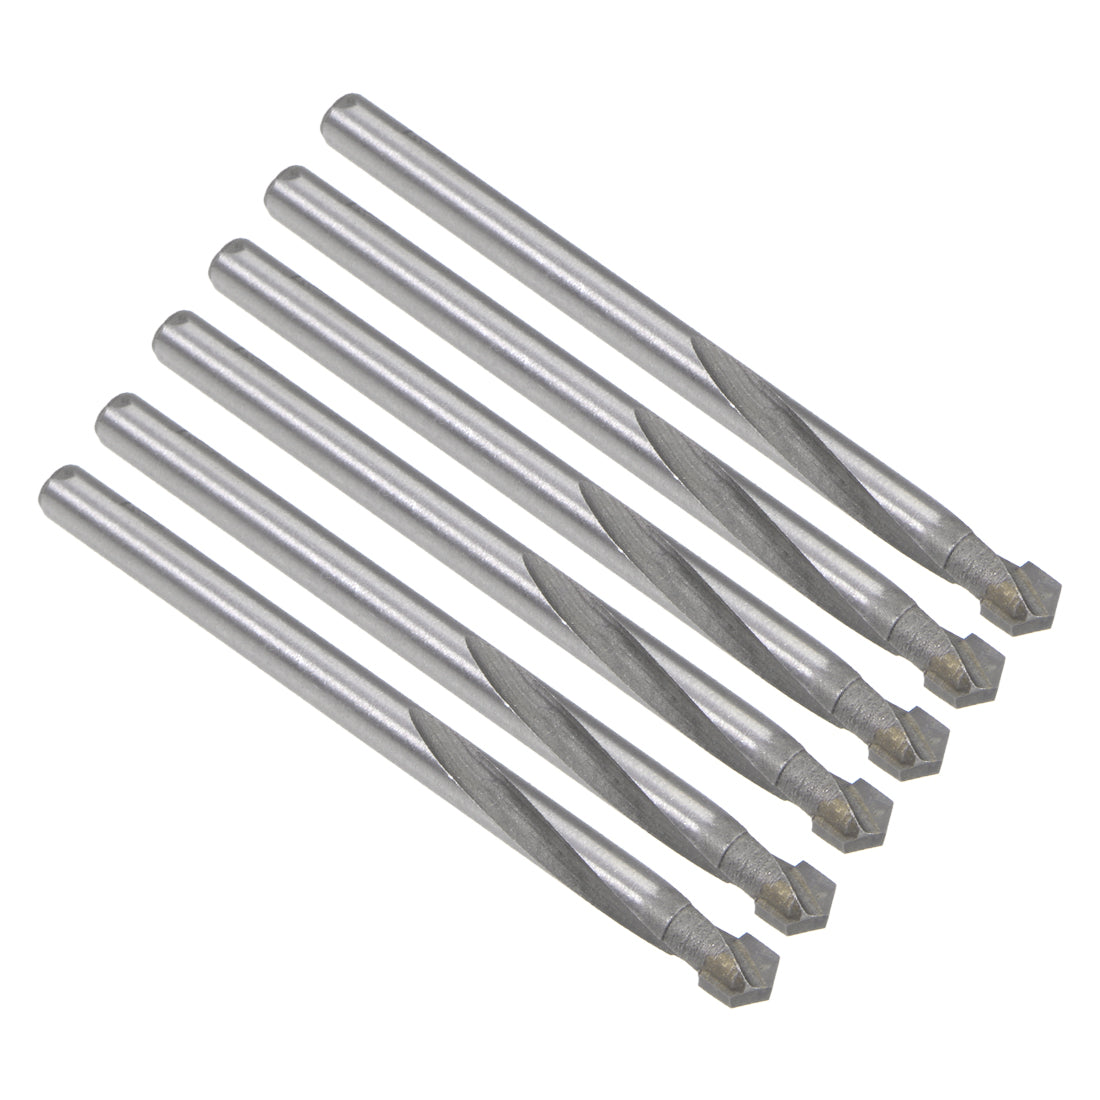 uxcell Uxcell 5.5mm Cemented Carbide Twist Drill Bits for Stainless Steel Copper Aluminum 6Pcs